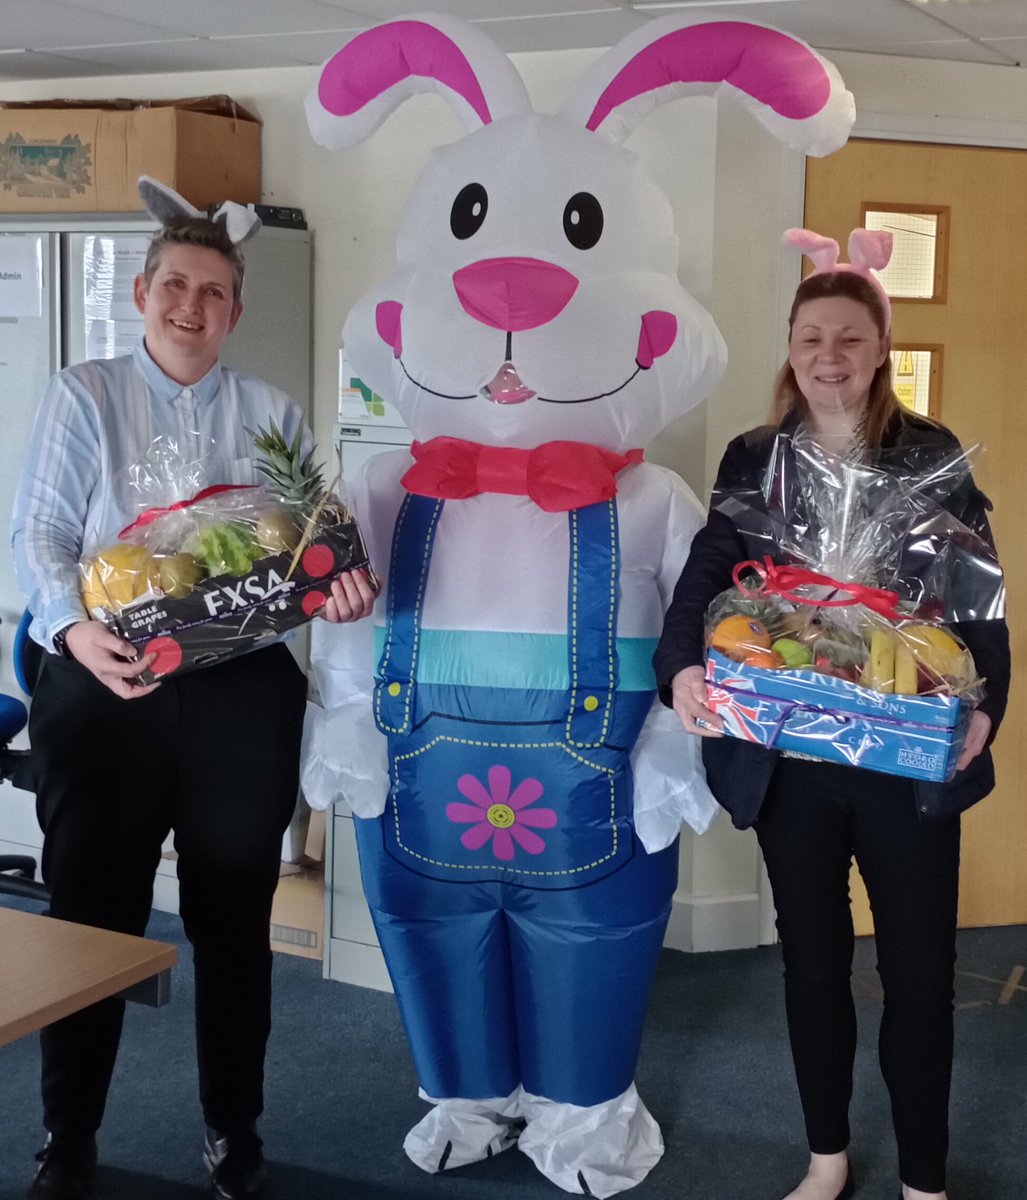 The Easter bunny has made a special visit to our district nurses in Cambridge. He was joined by Lisa and Alex from Athena Care Homes, who have donated two hampers to thank the nurses for all their hard work supporting residents at Langdon House and Wood House.